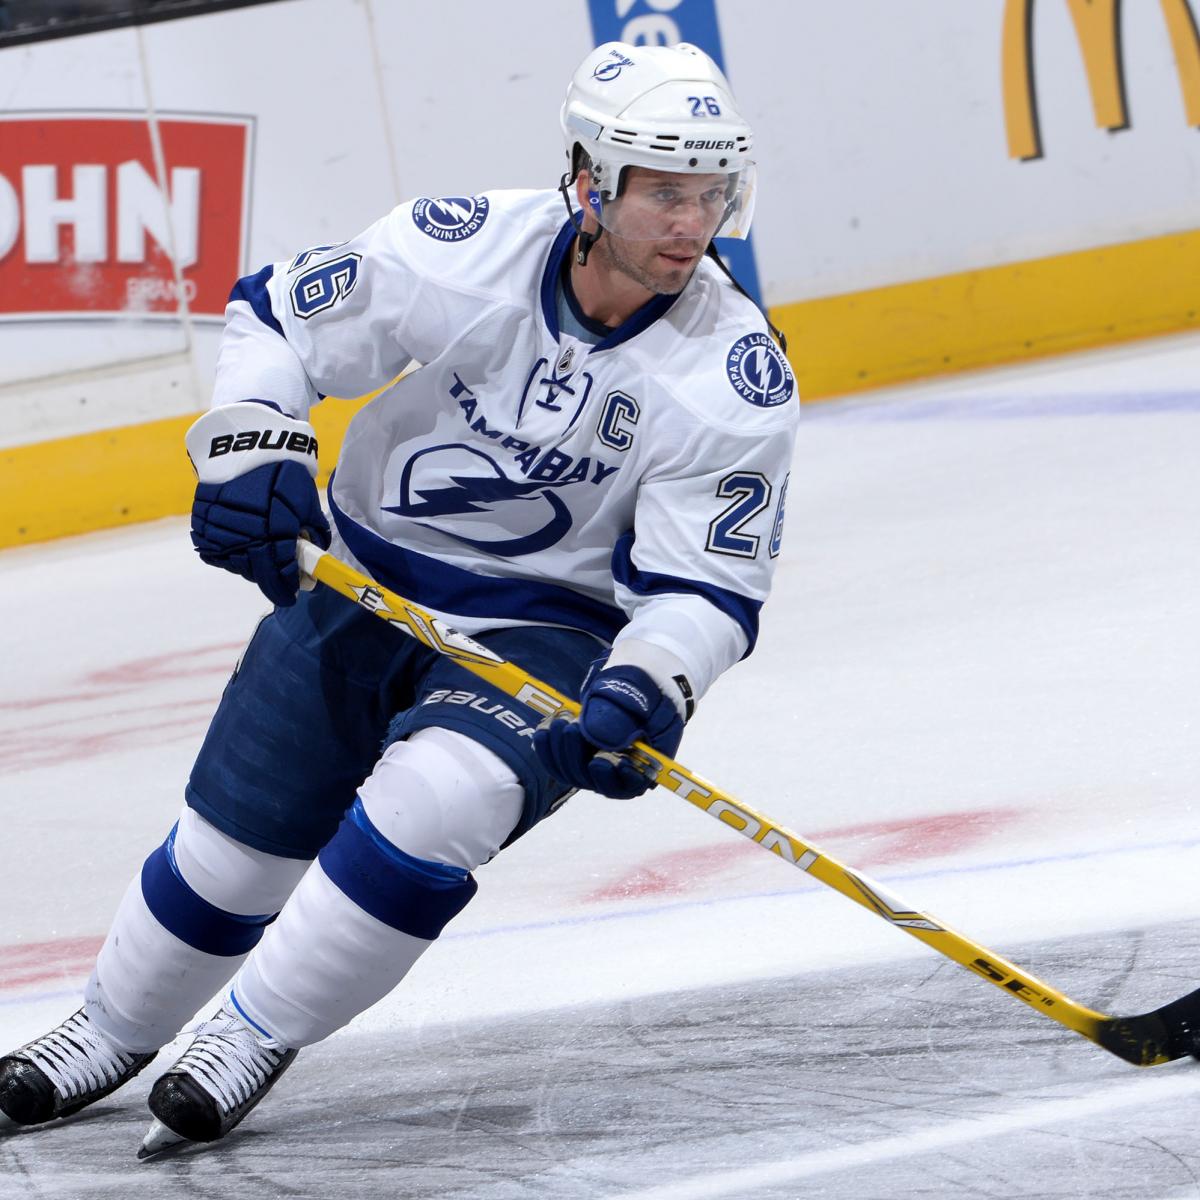 Maybe Steven Stamkos isn't Lightning's best player after all 